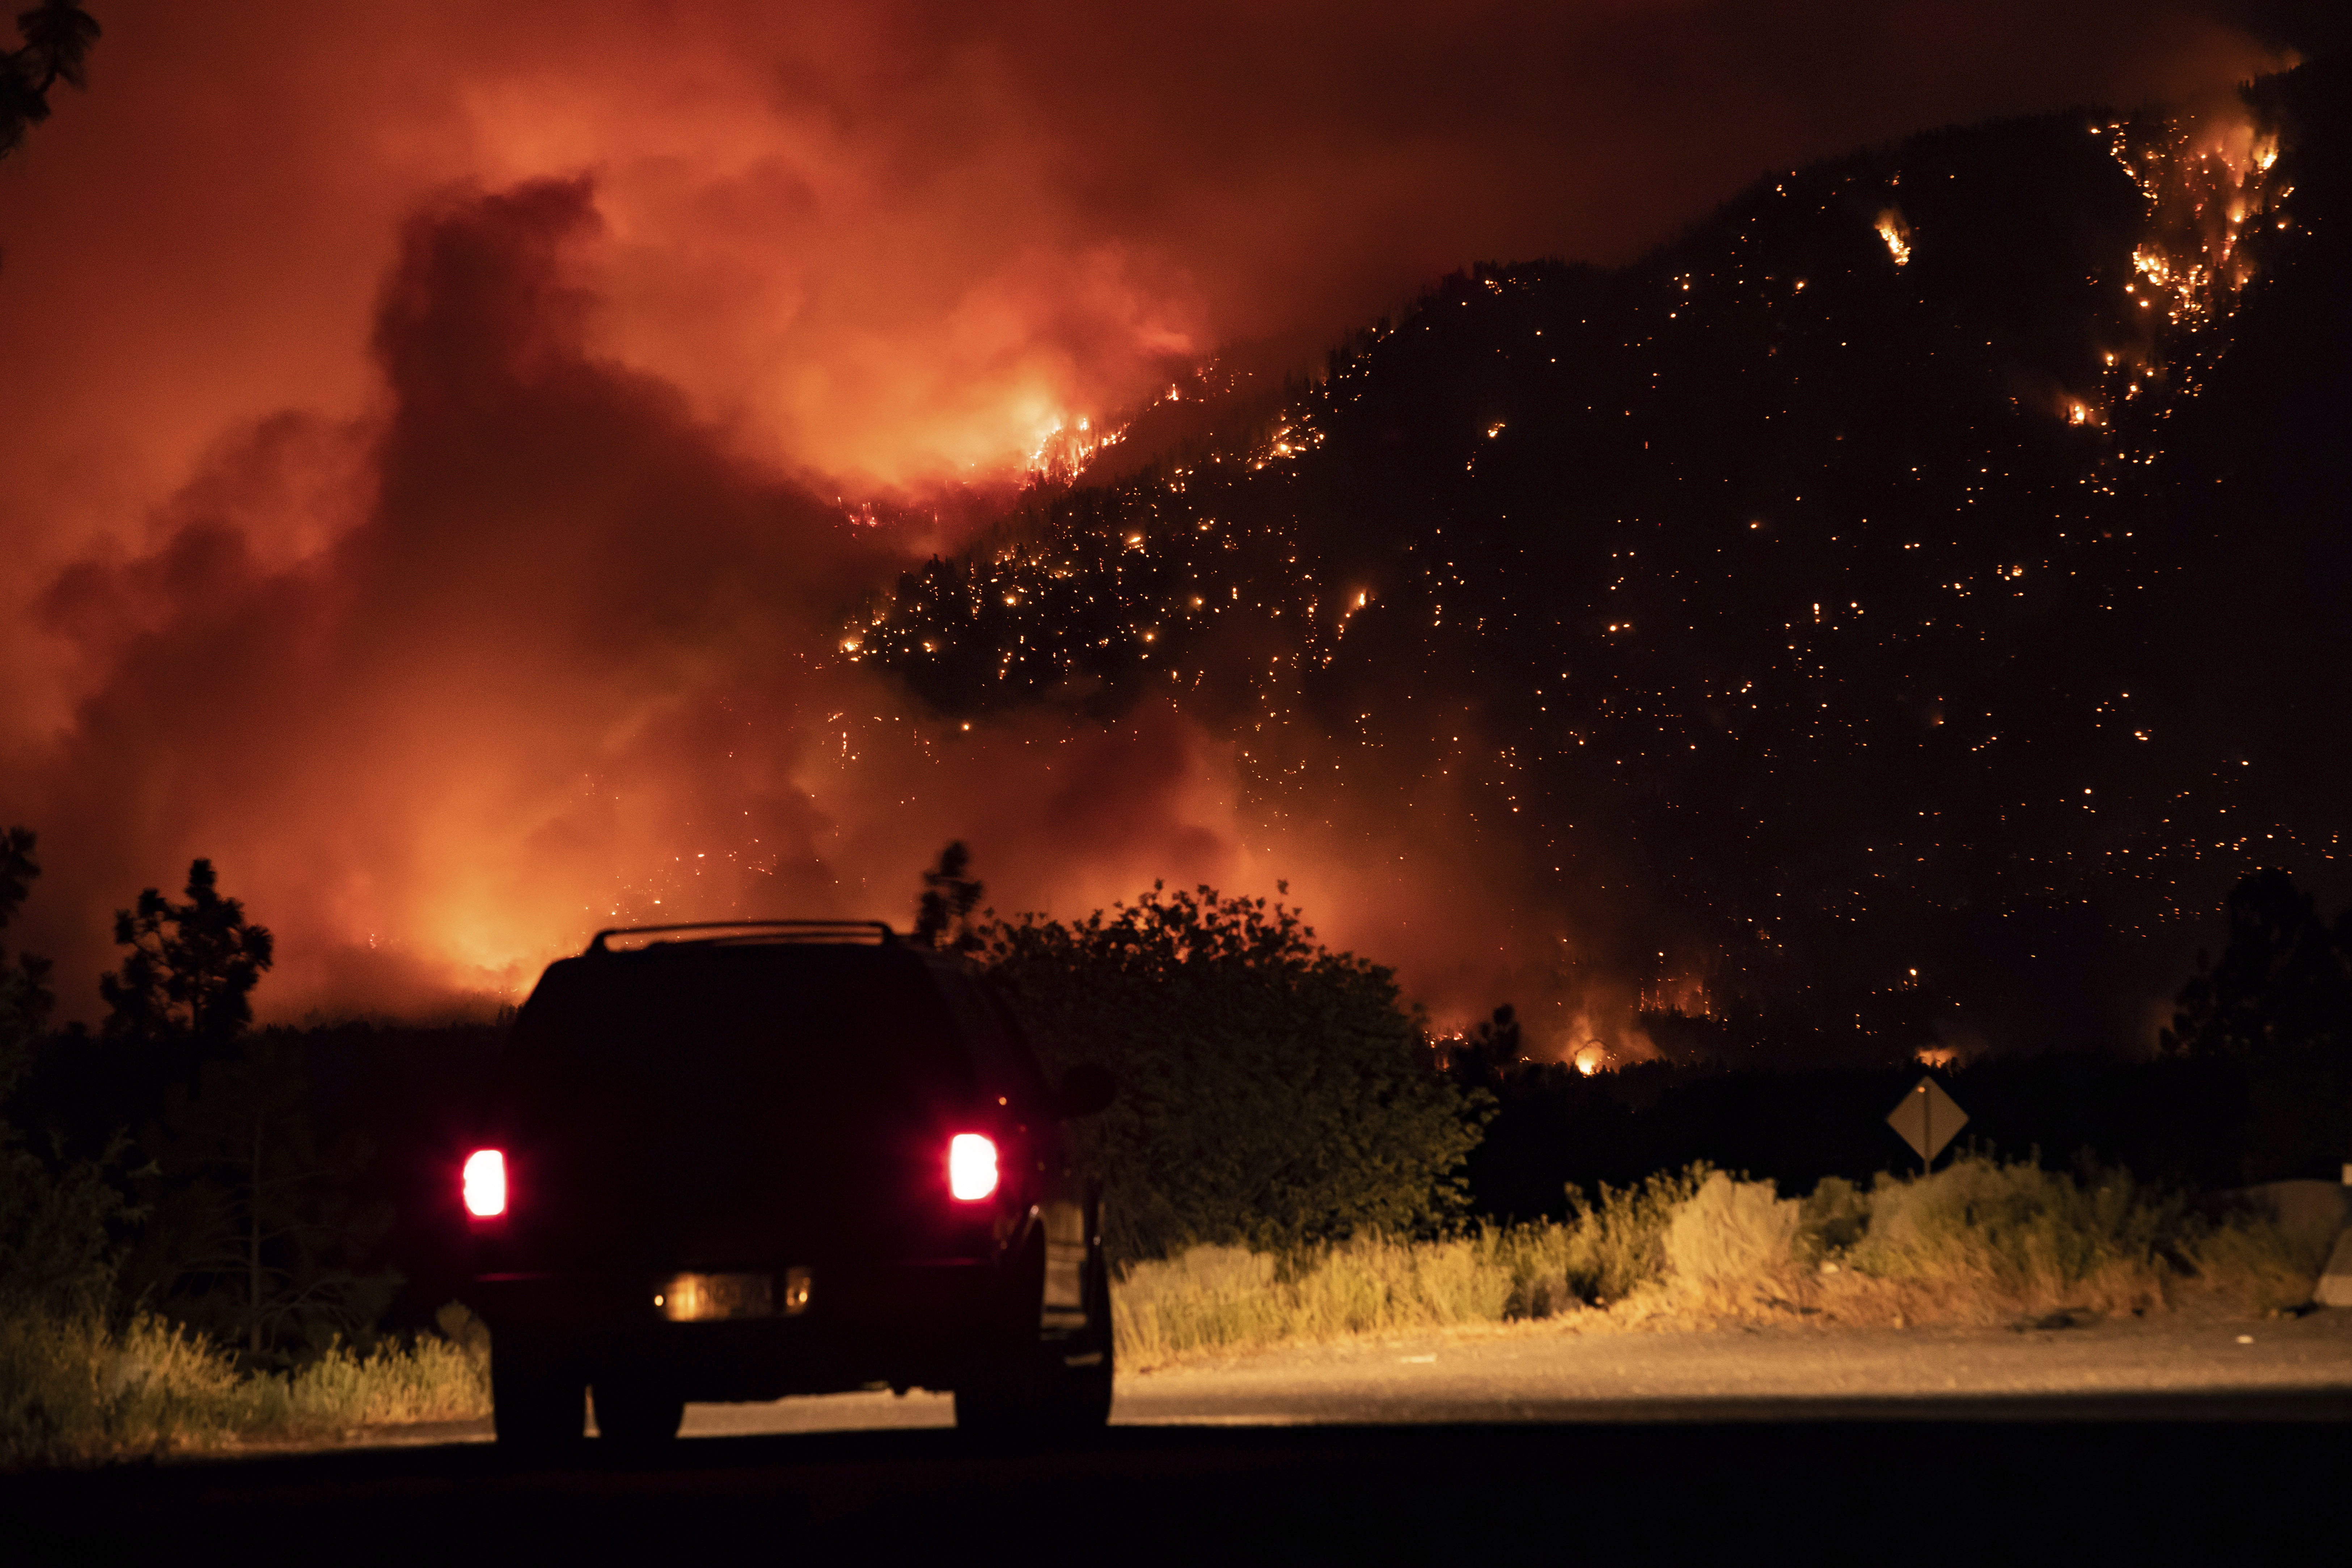 A motorist watches from a pullout on the Trans-Canada Highway as a wildfire burns on the side of a mountain in Lytton, B.C., Thursday, July 1, 2021. (Darryl Dyck/The Canadian Press via AP)